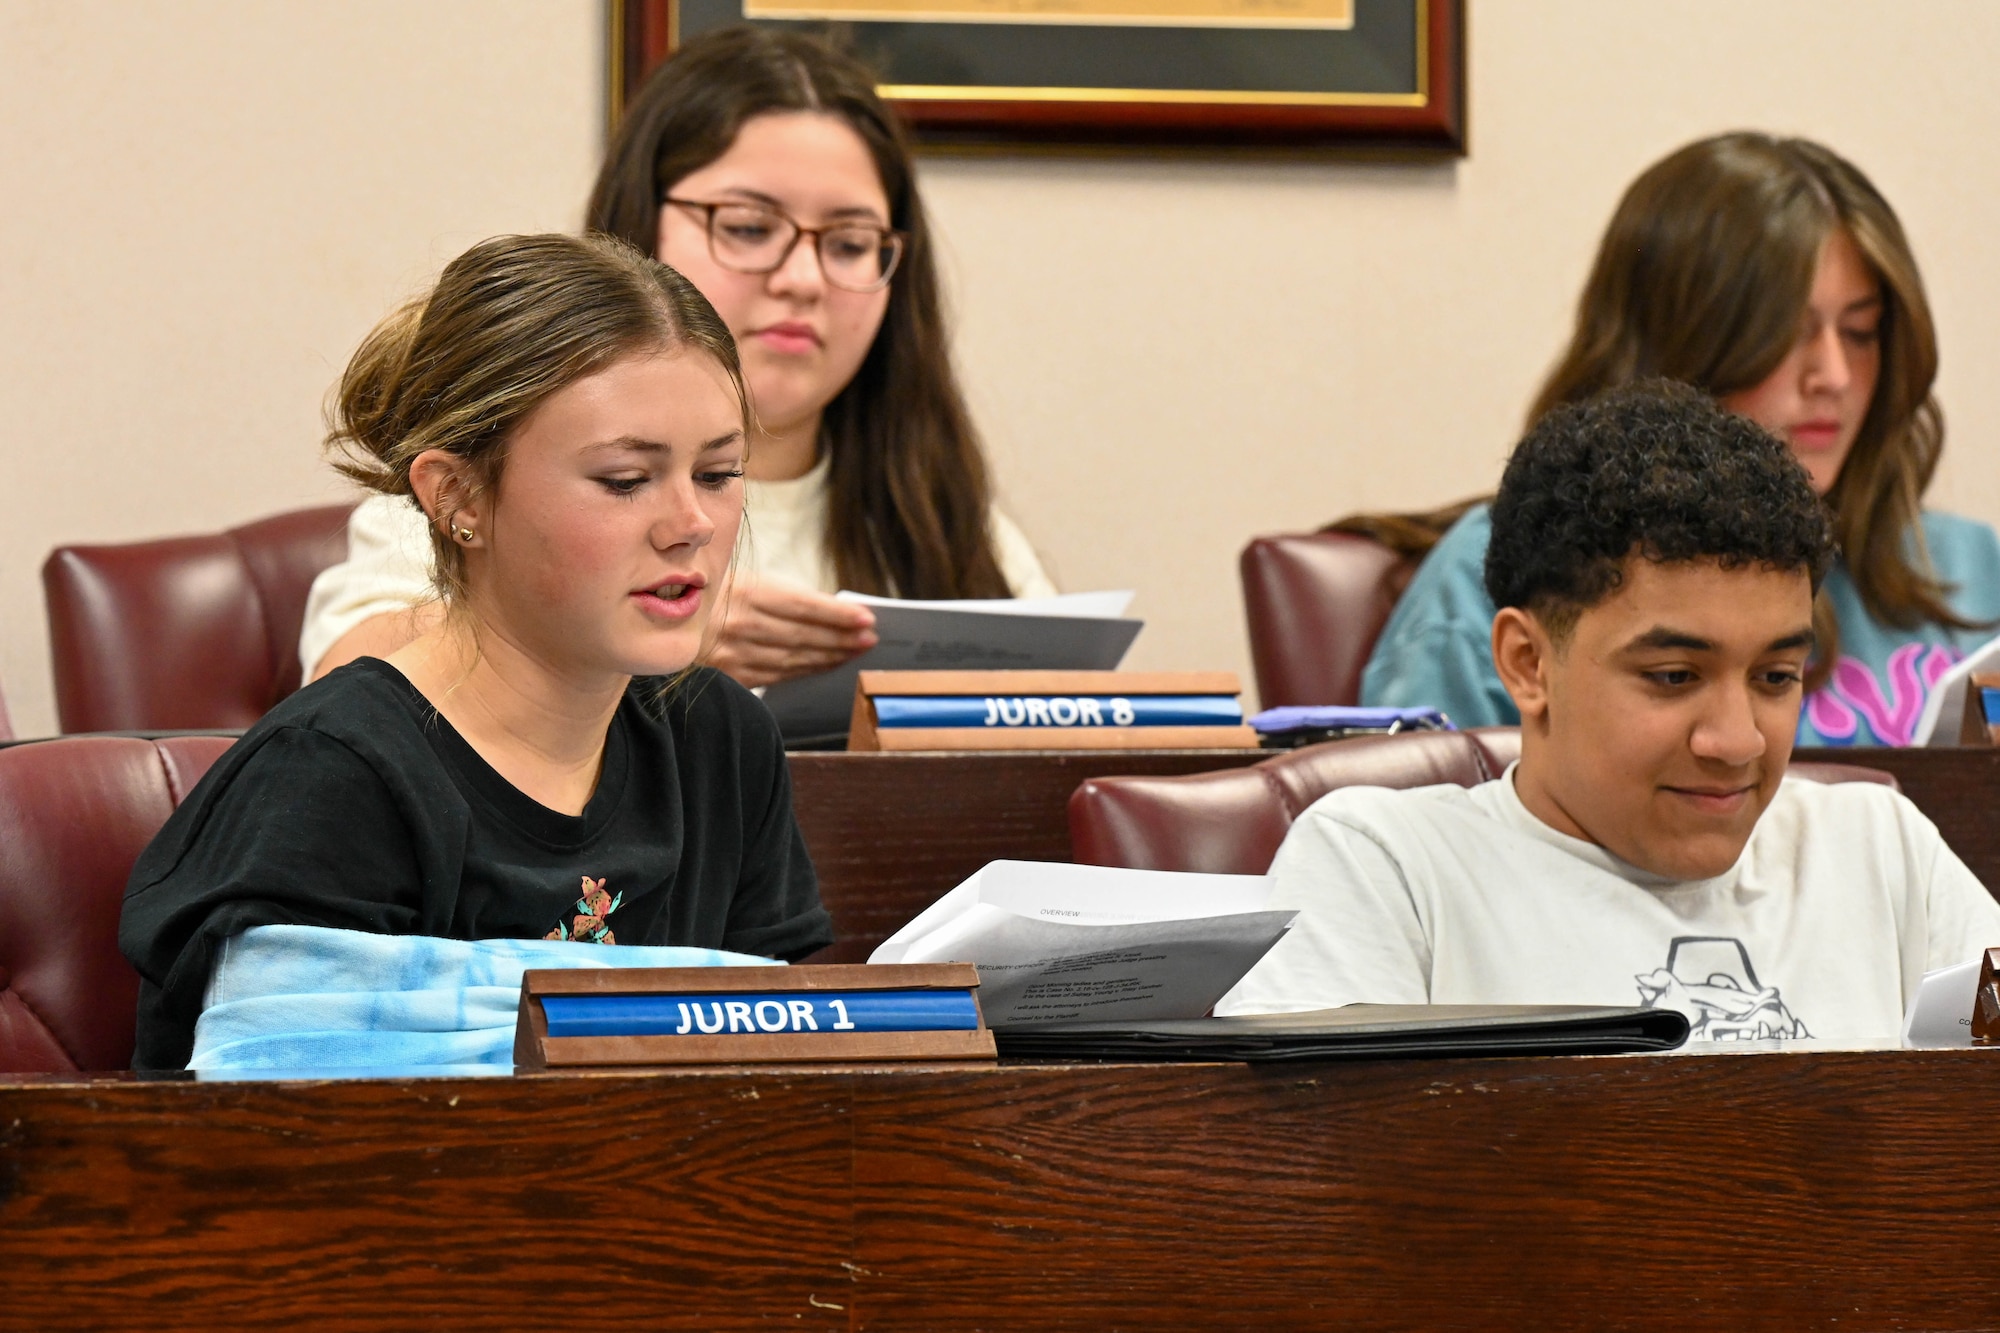 An Altus High School student reads from a script during a mock trial at Altus Air Force Base, Oklahoma, May 1, 2023. The students participated in a scripted trial and presented prepared evidence. (U.S. Air Force photo by Senior Airman Trenton Jancze)